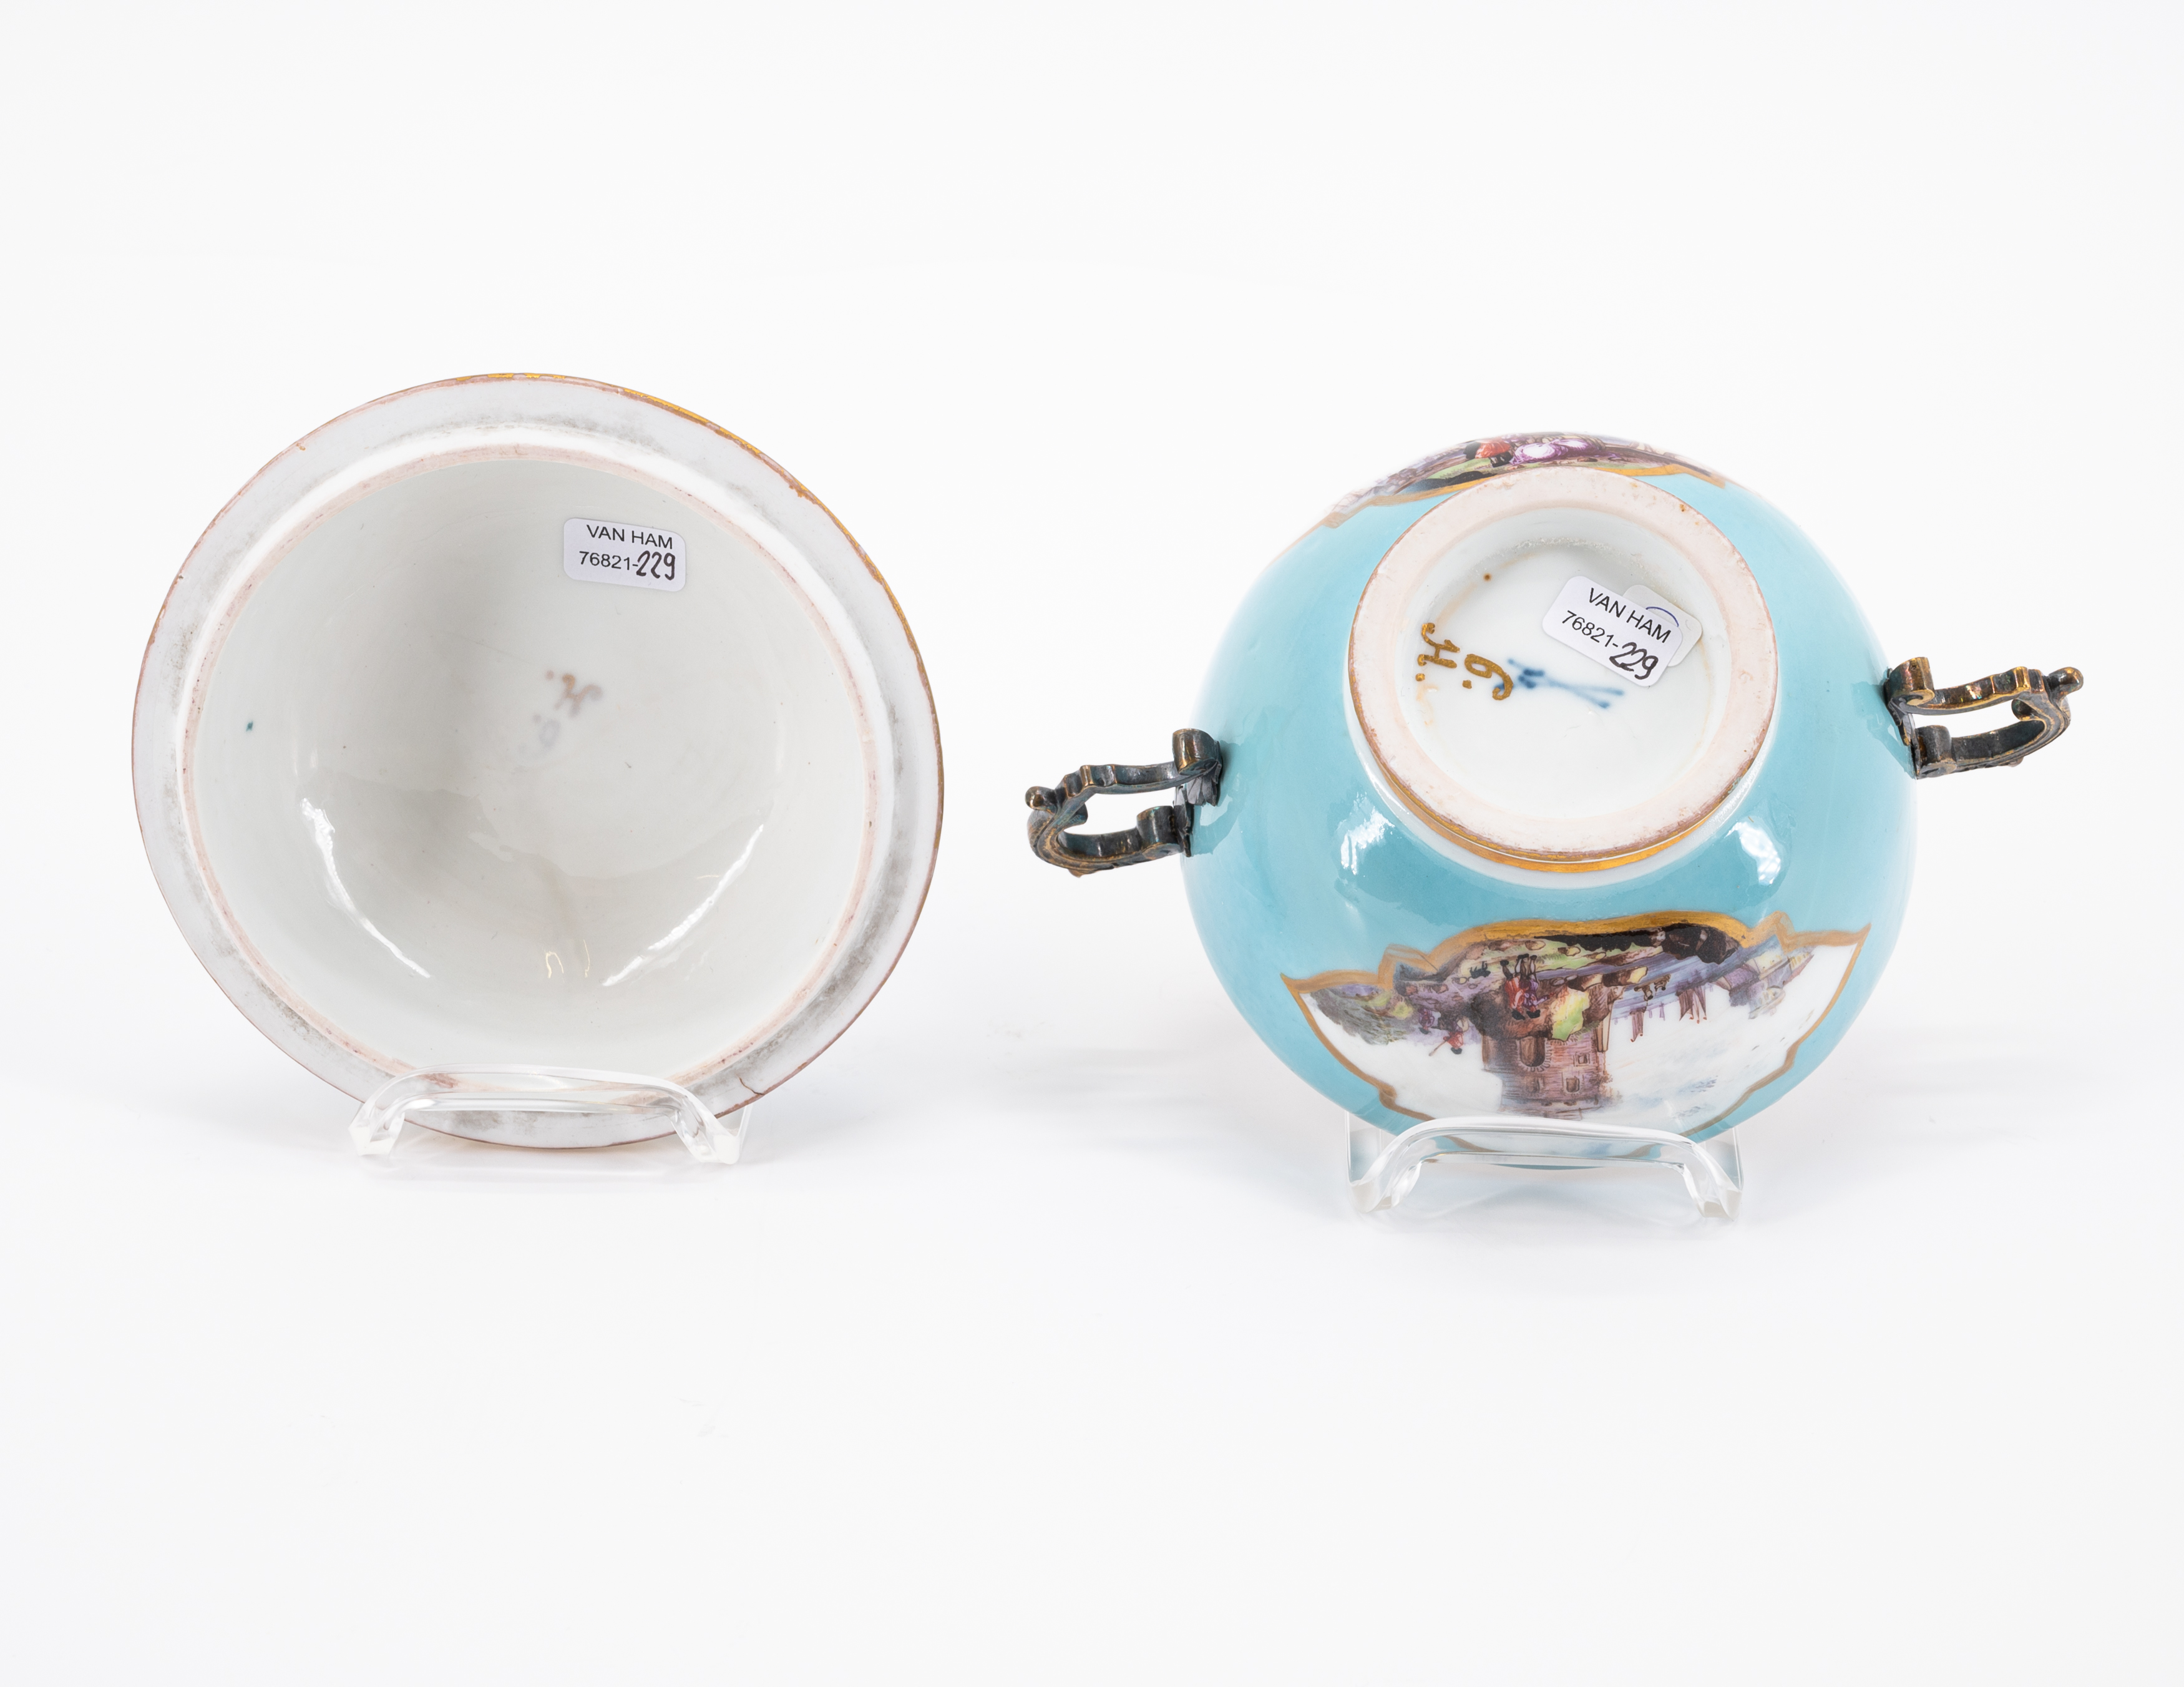 SMALL PORCELAIN TUREEN AND SAUCER WITH TURQUOISE BACKGROUND AND MERCHANT'S NAVY SCENES - Image 8 of 8